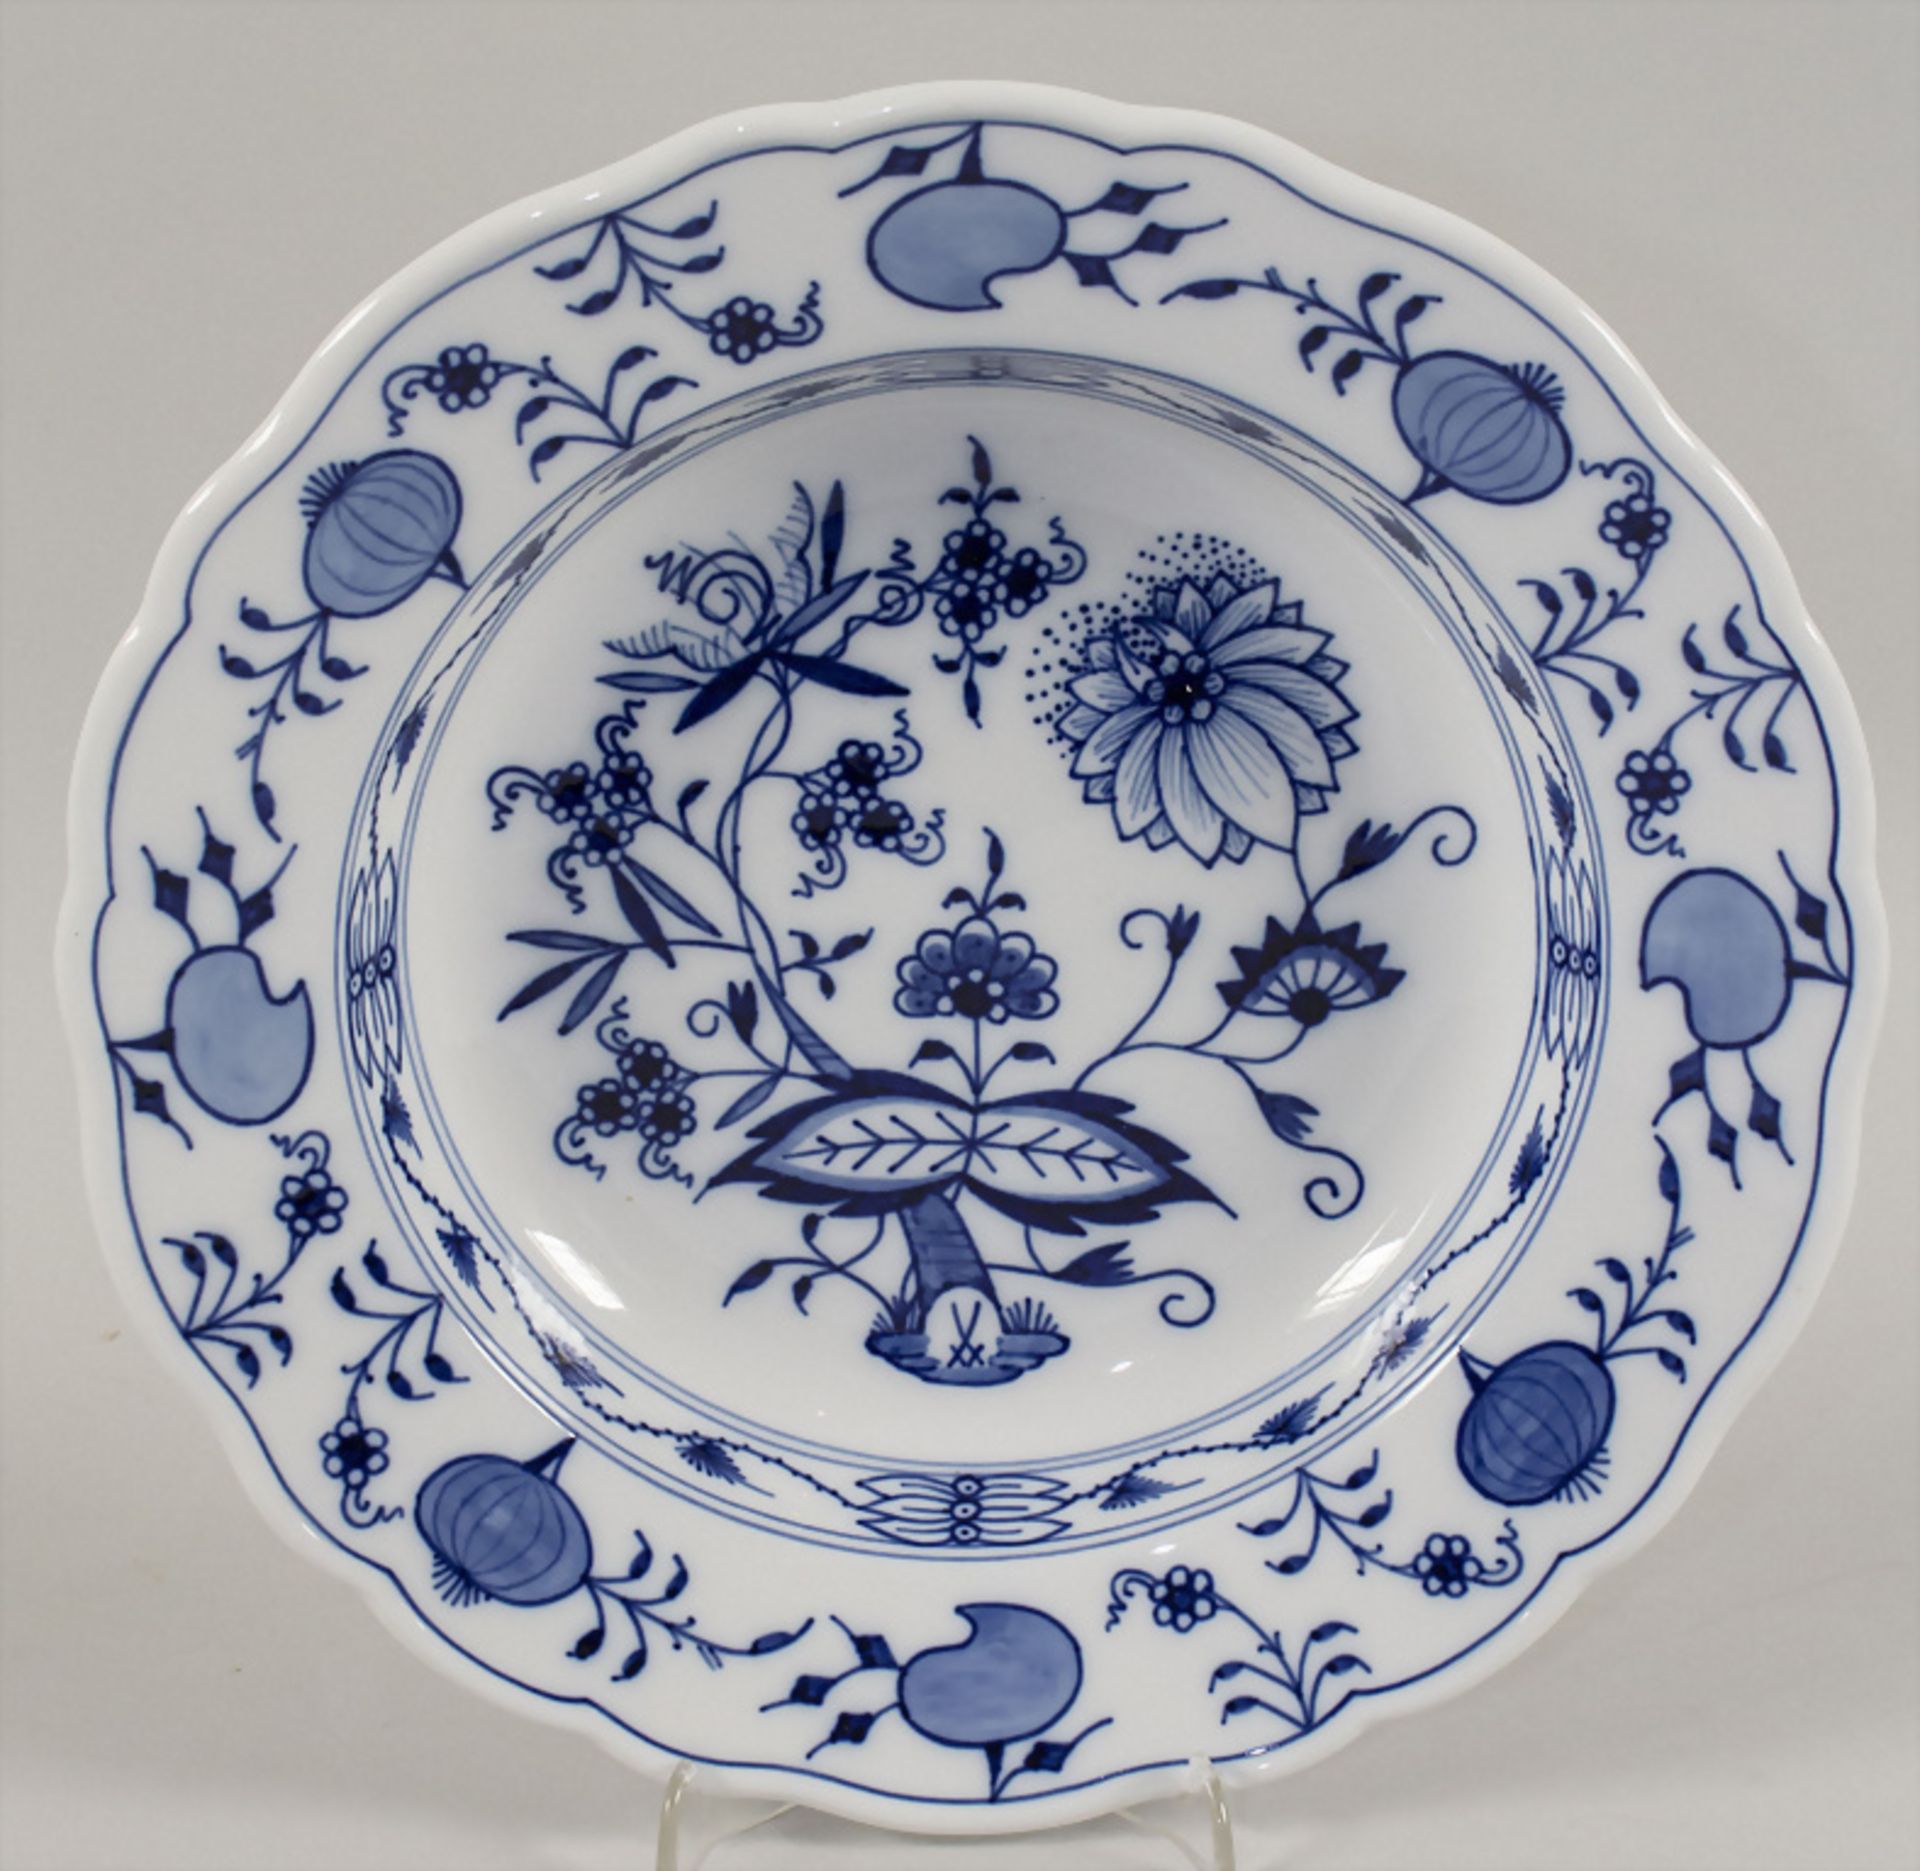 5 Speiseteller und 5 Suppenteller Zwiebelmuster / 5 dinner plates and 5 soup plates with onion ... - Image 3 of 4